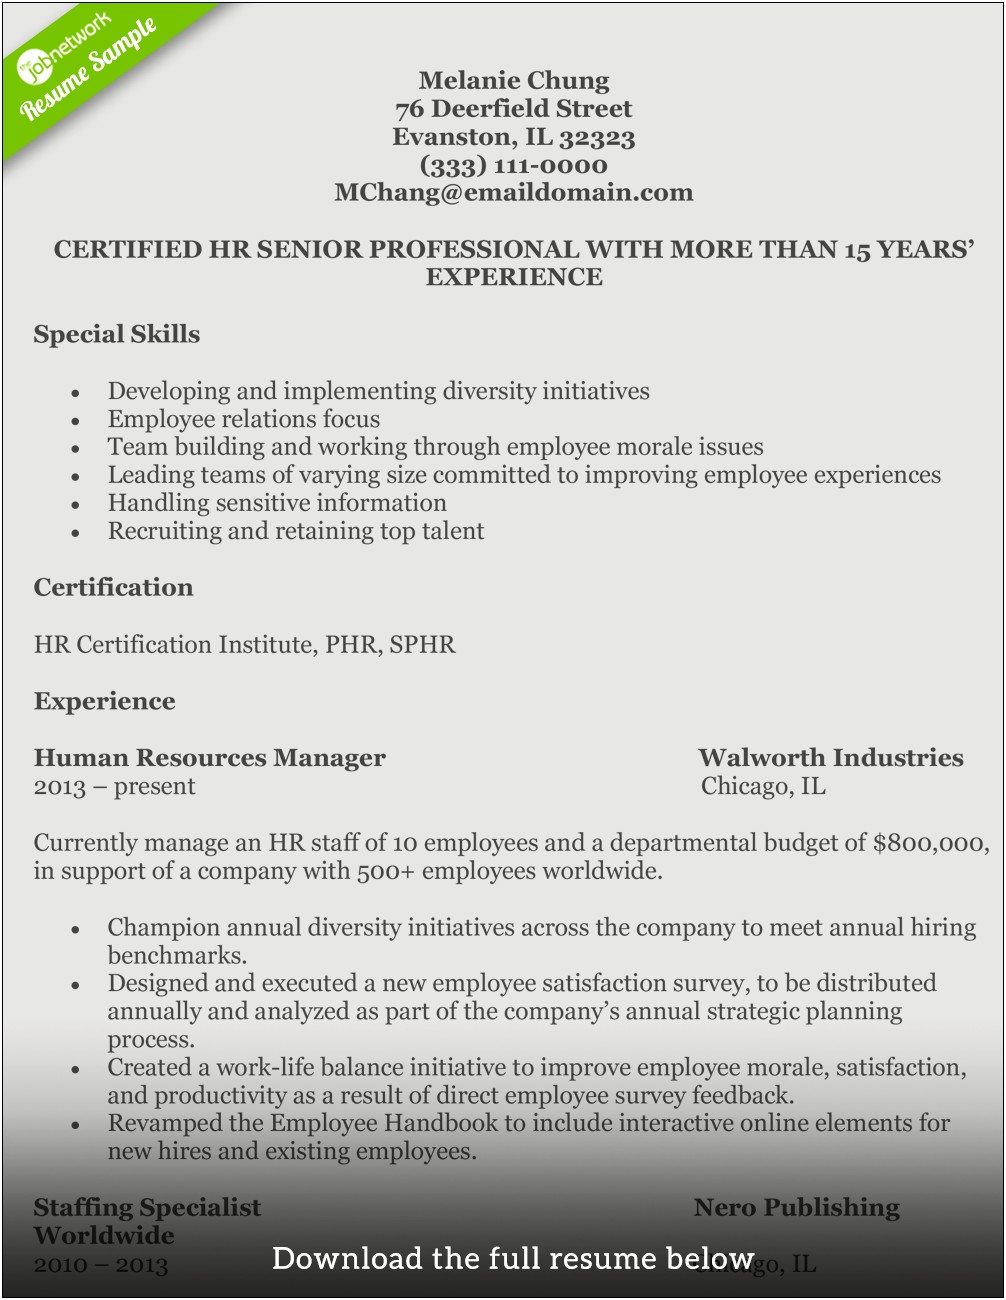 Resume Objective For Entry Level Hr Position